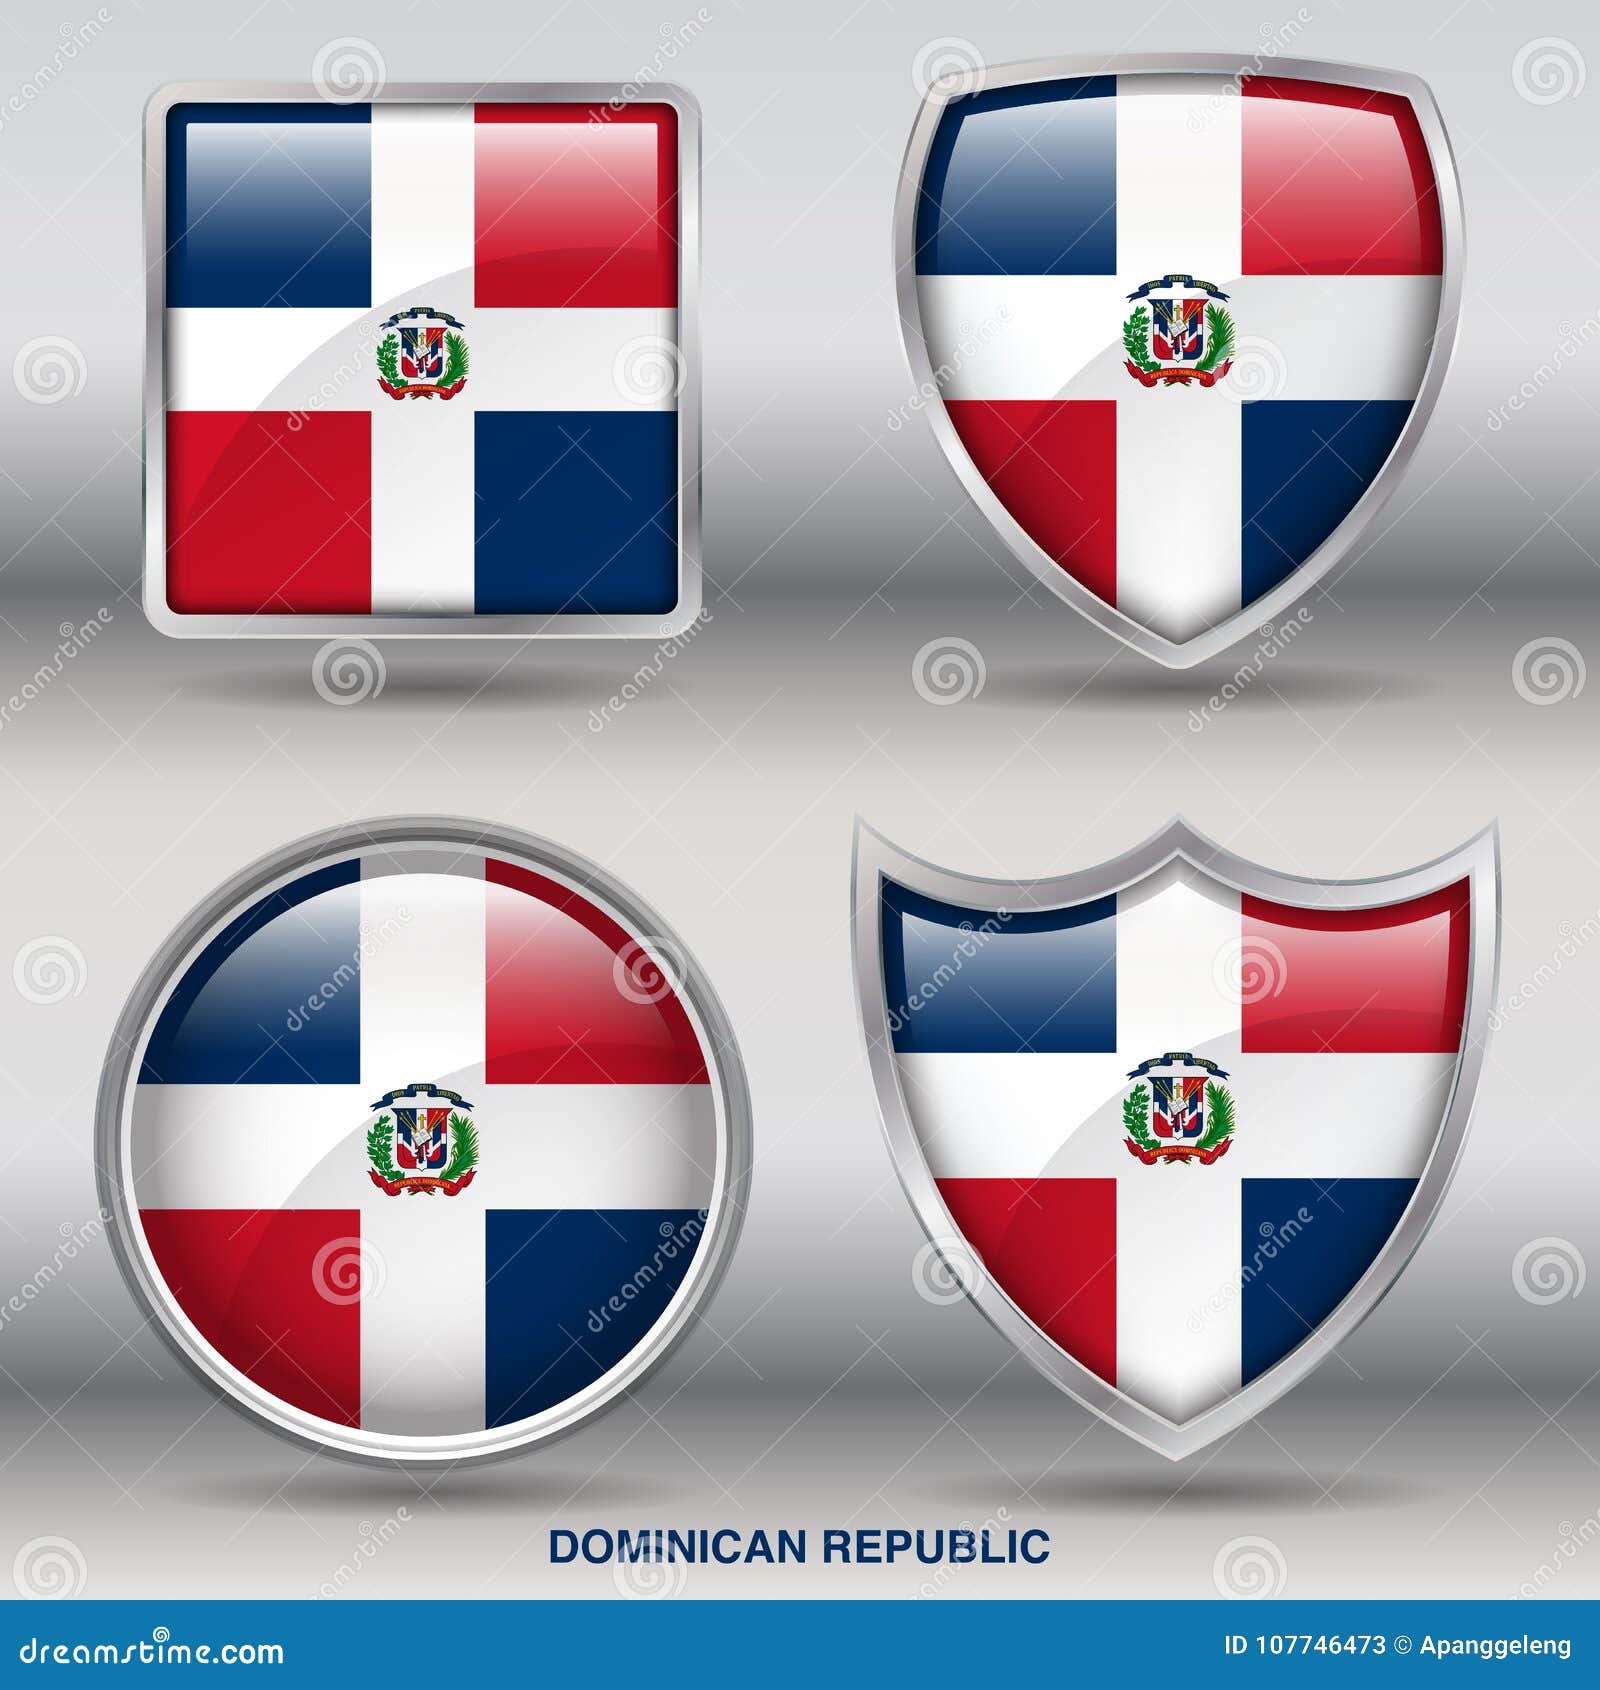 Download Dominican Republic Flag In 4 Shapes Collection With ...